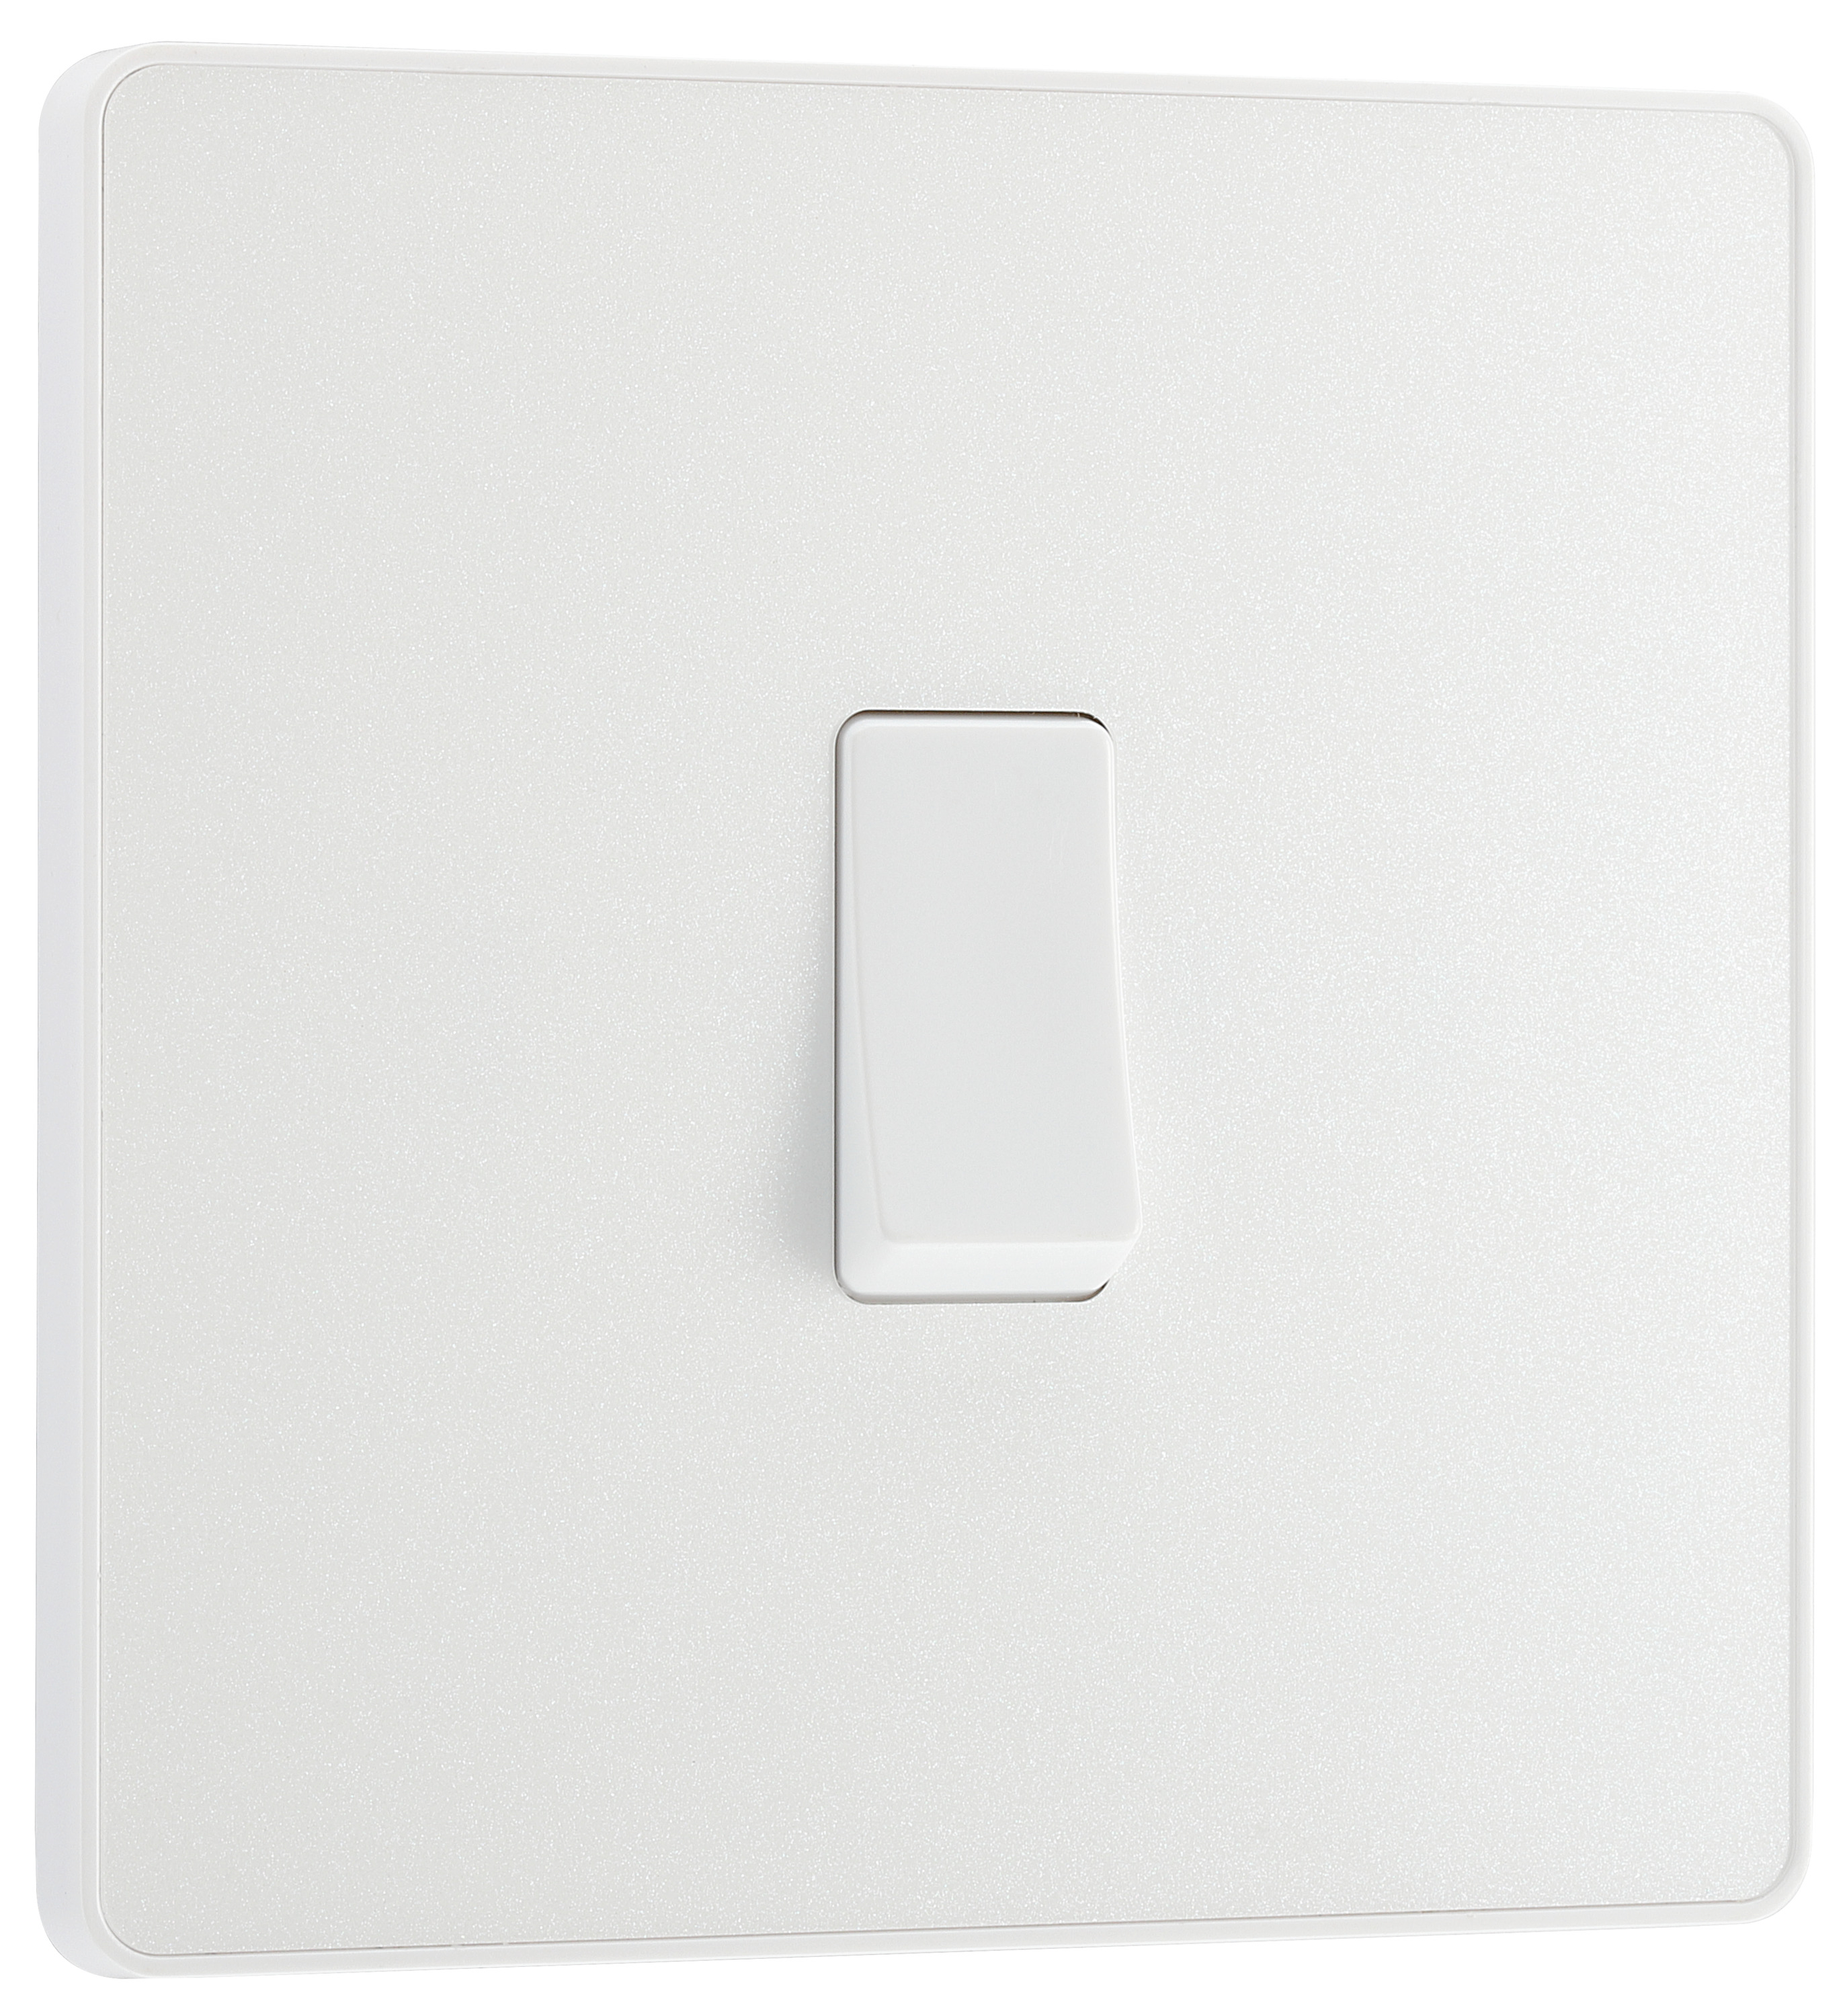 BG Evolve Pearlescent White 20A Single Switch - 2 Way